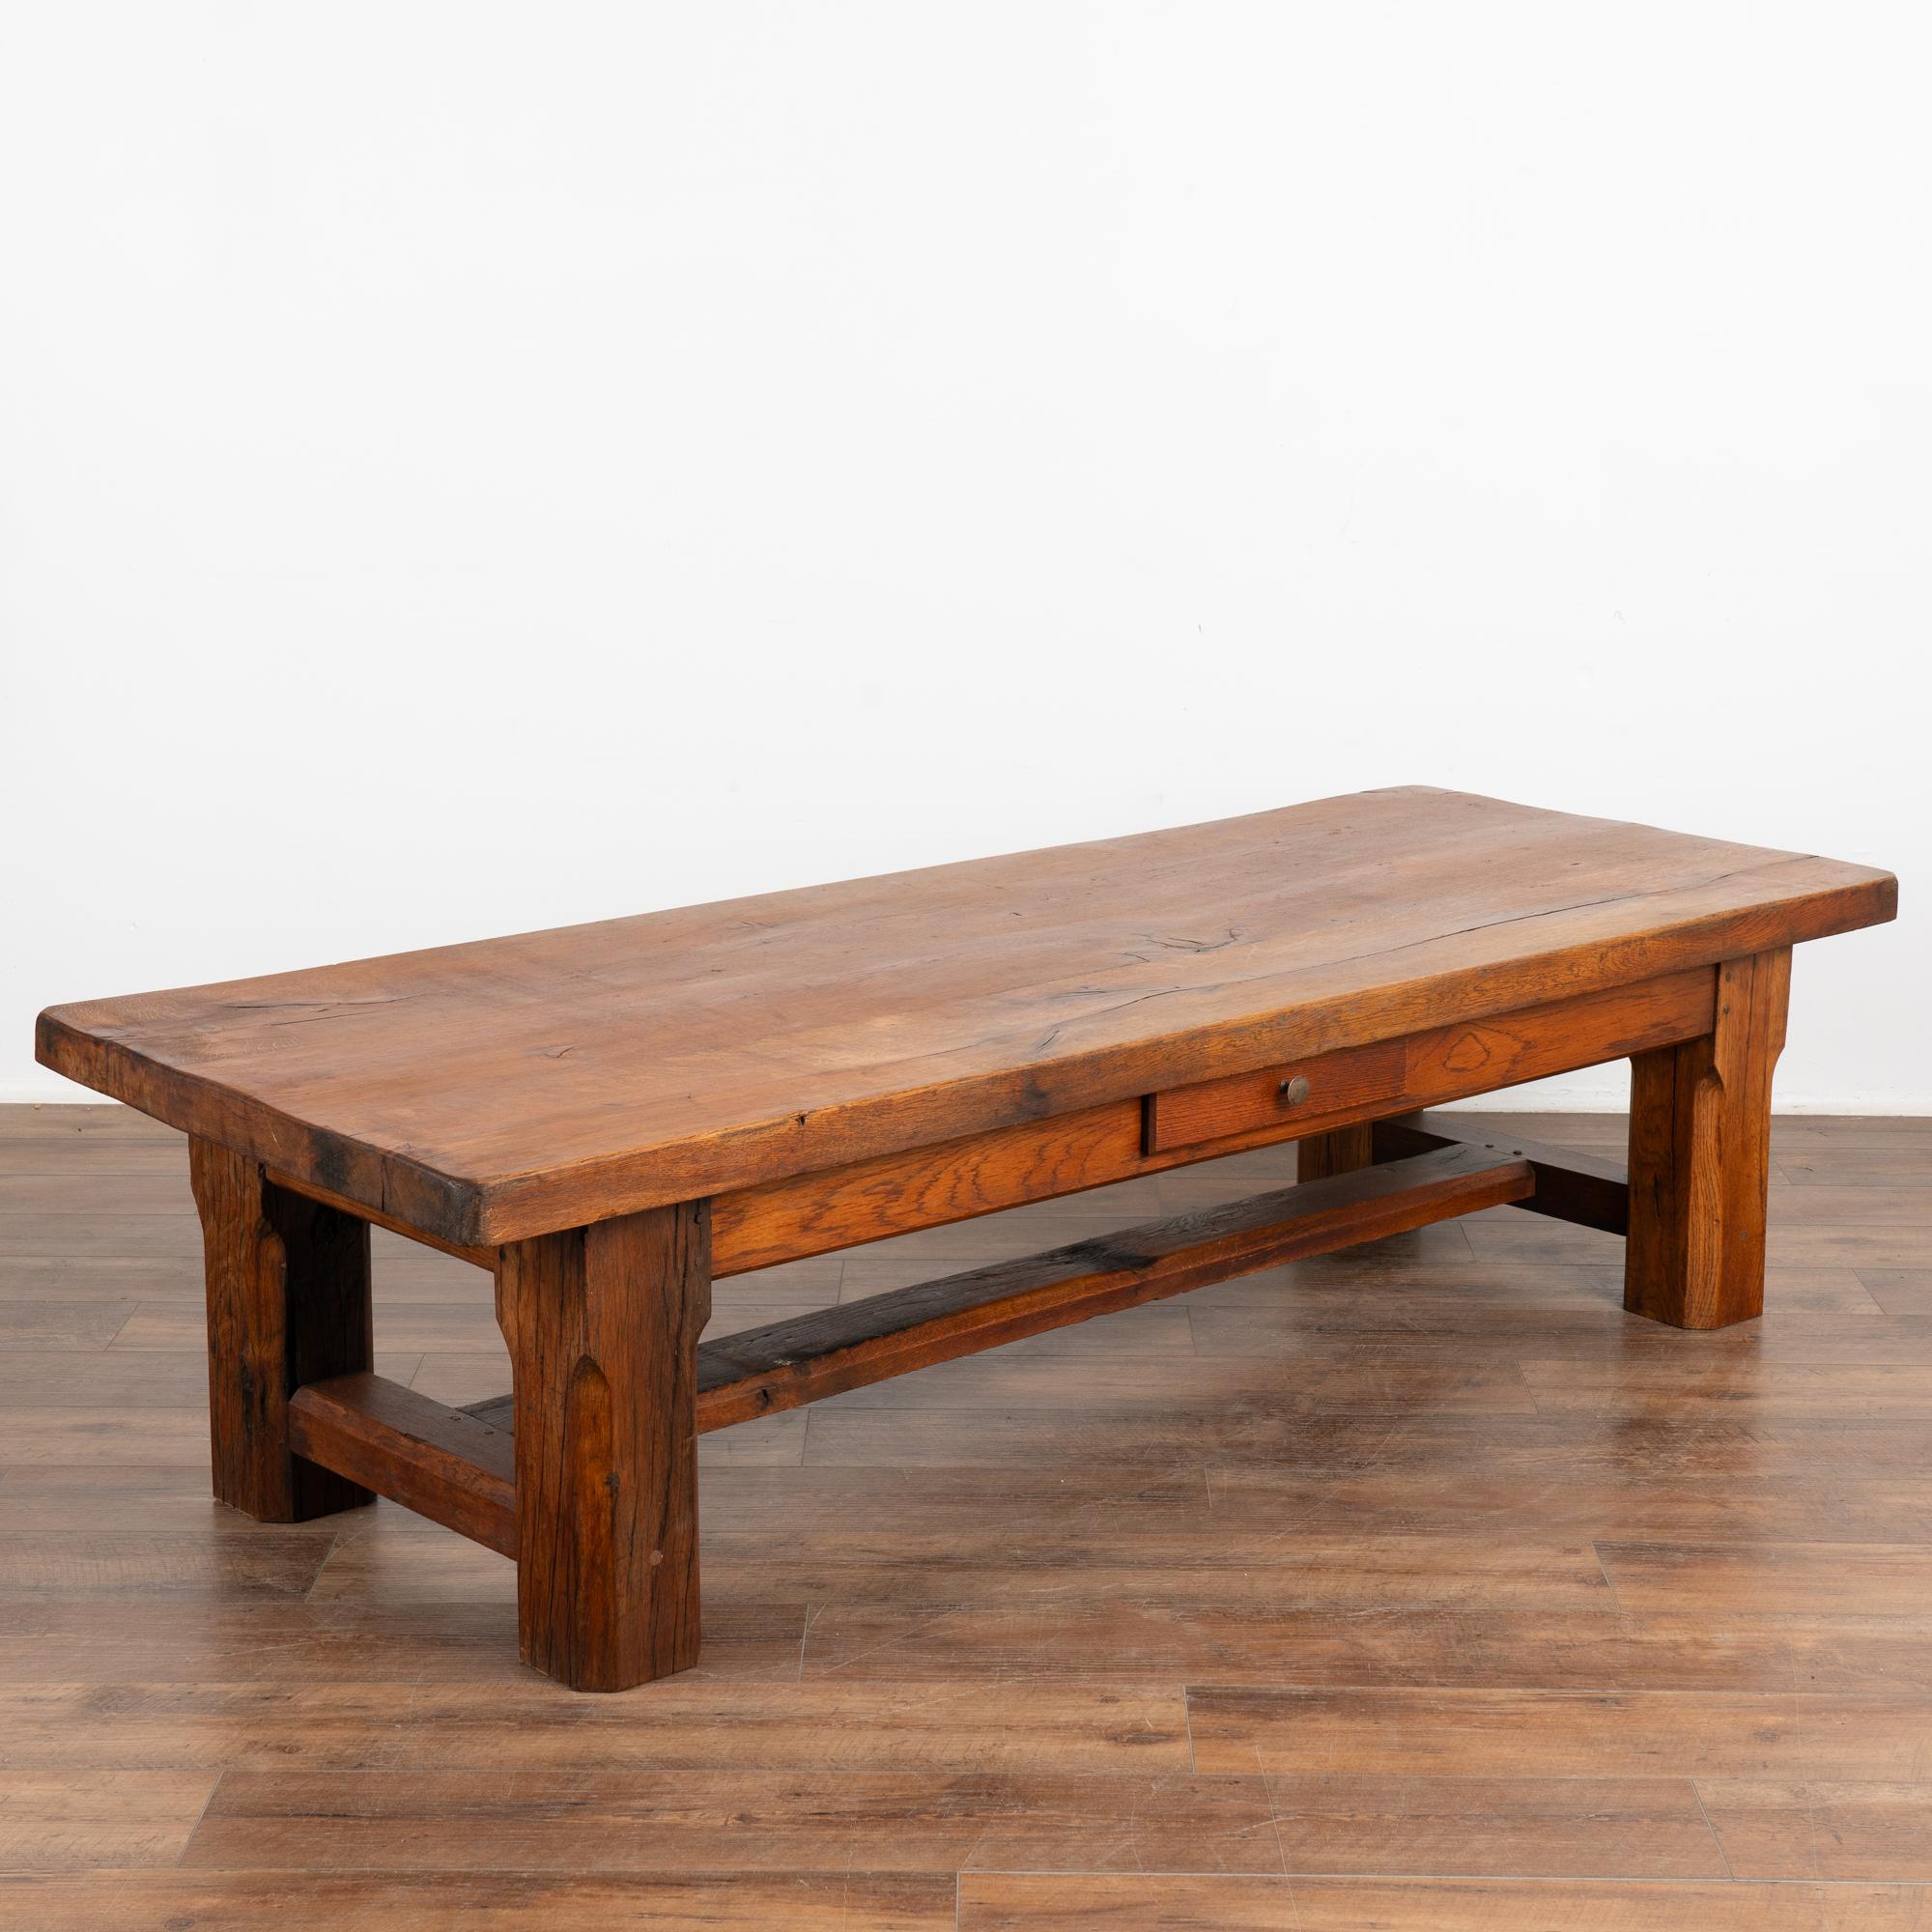 The beauty of this French country coffee table with one drawer comes from the rich patina of the wood. Every crack, ding, old knot and stain all add to the depth and richness found in the thick top. Rests on heavy legs with a stretcher